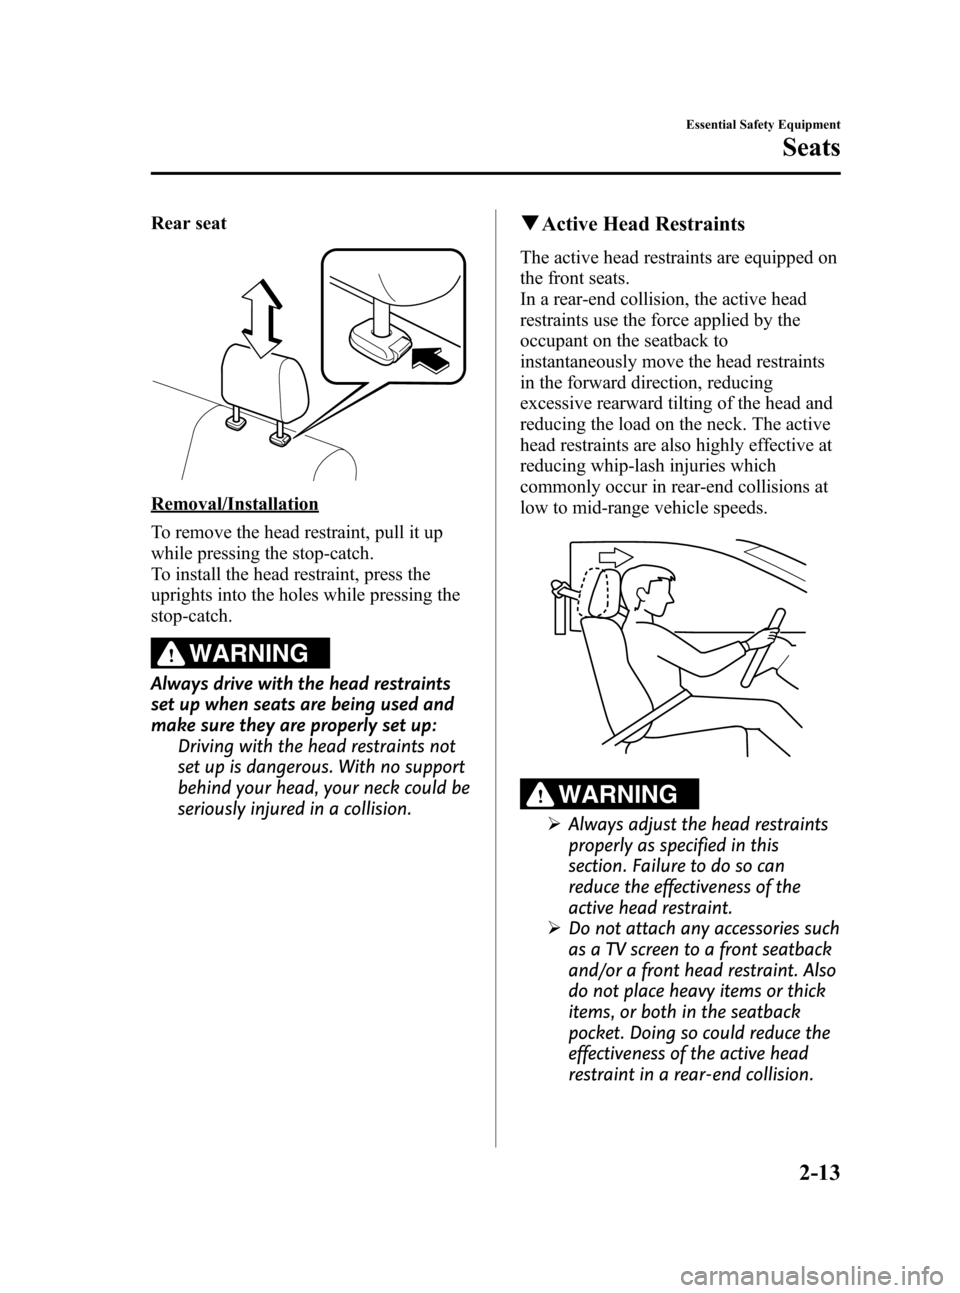 MAZDA MODEL 3 HATCHBACK 2010   (in English) Owners Guide Black plate (27,1)
Rear seat
Removal/Installation
To remove the head restraint, pull it up
while pressing the stop-catch.
To install the head restraint, press the
uprights into the holes while pressin